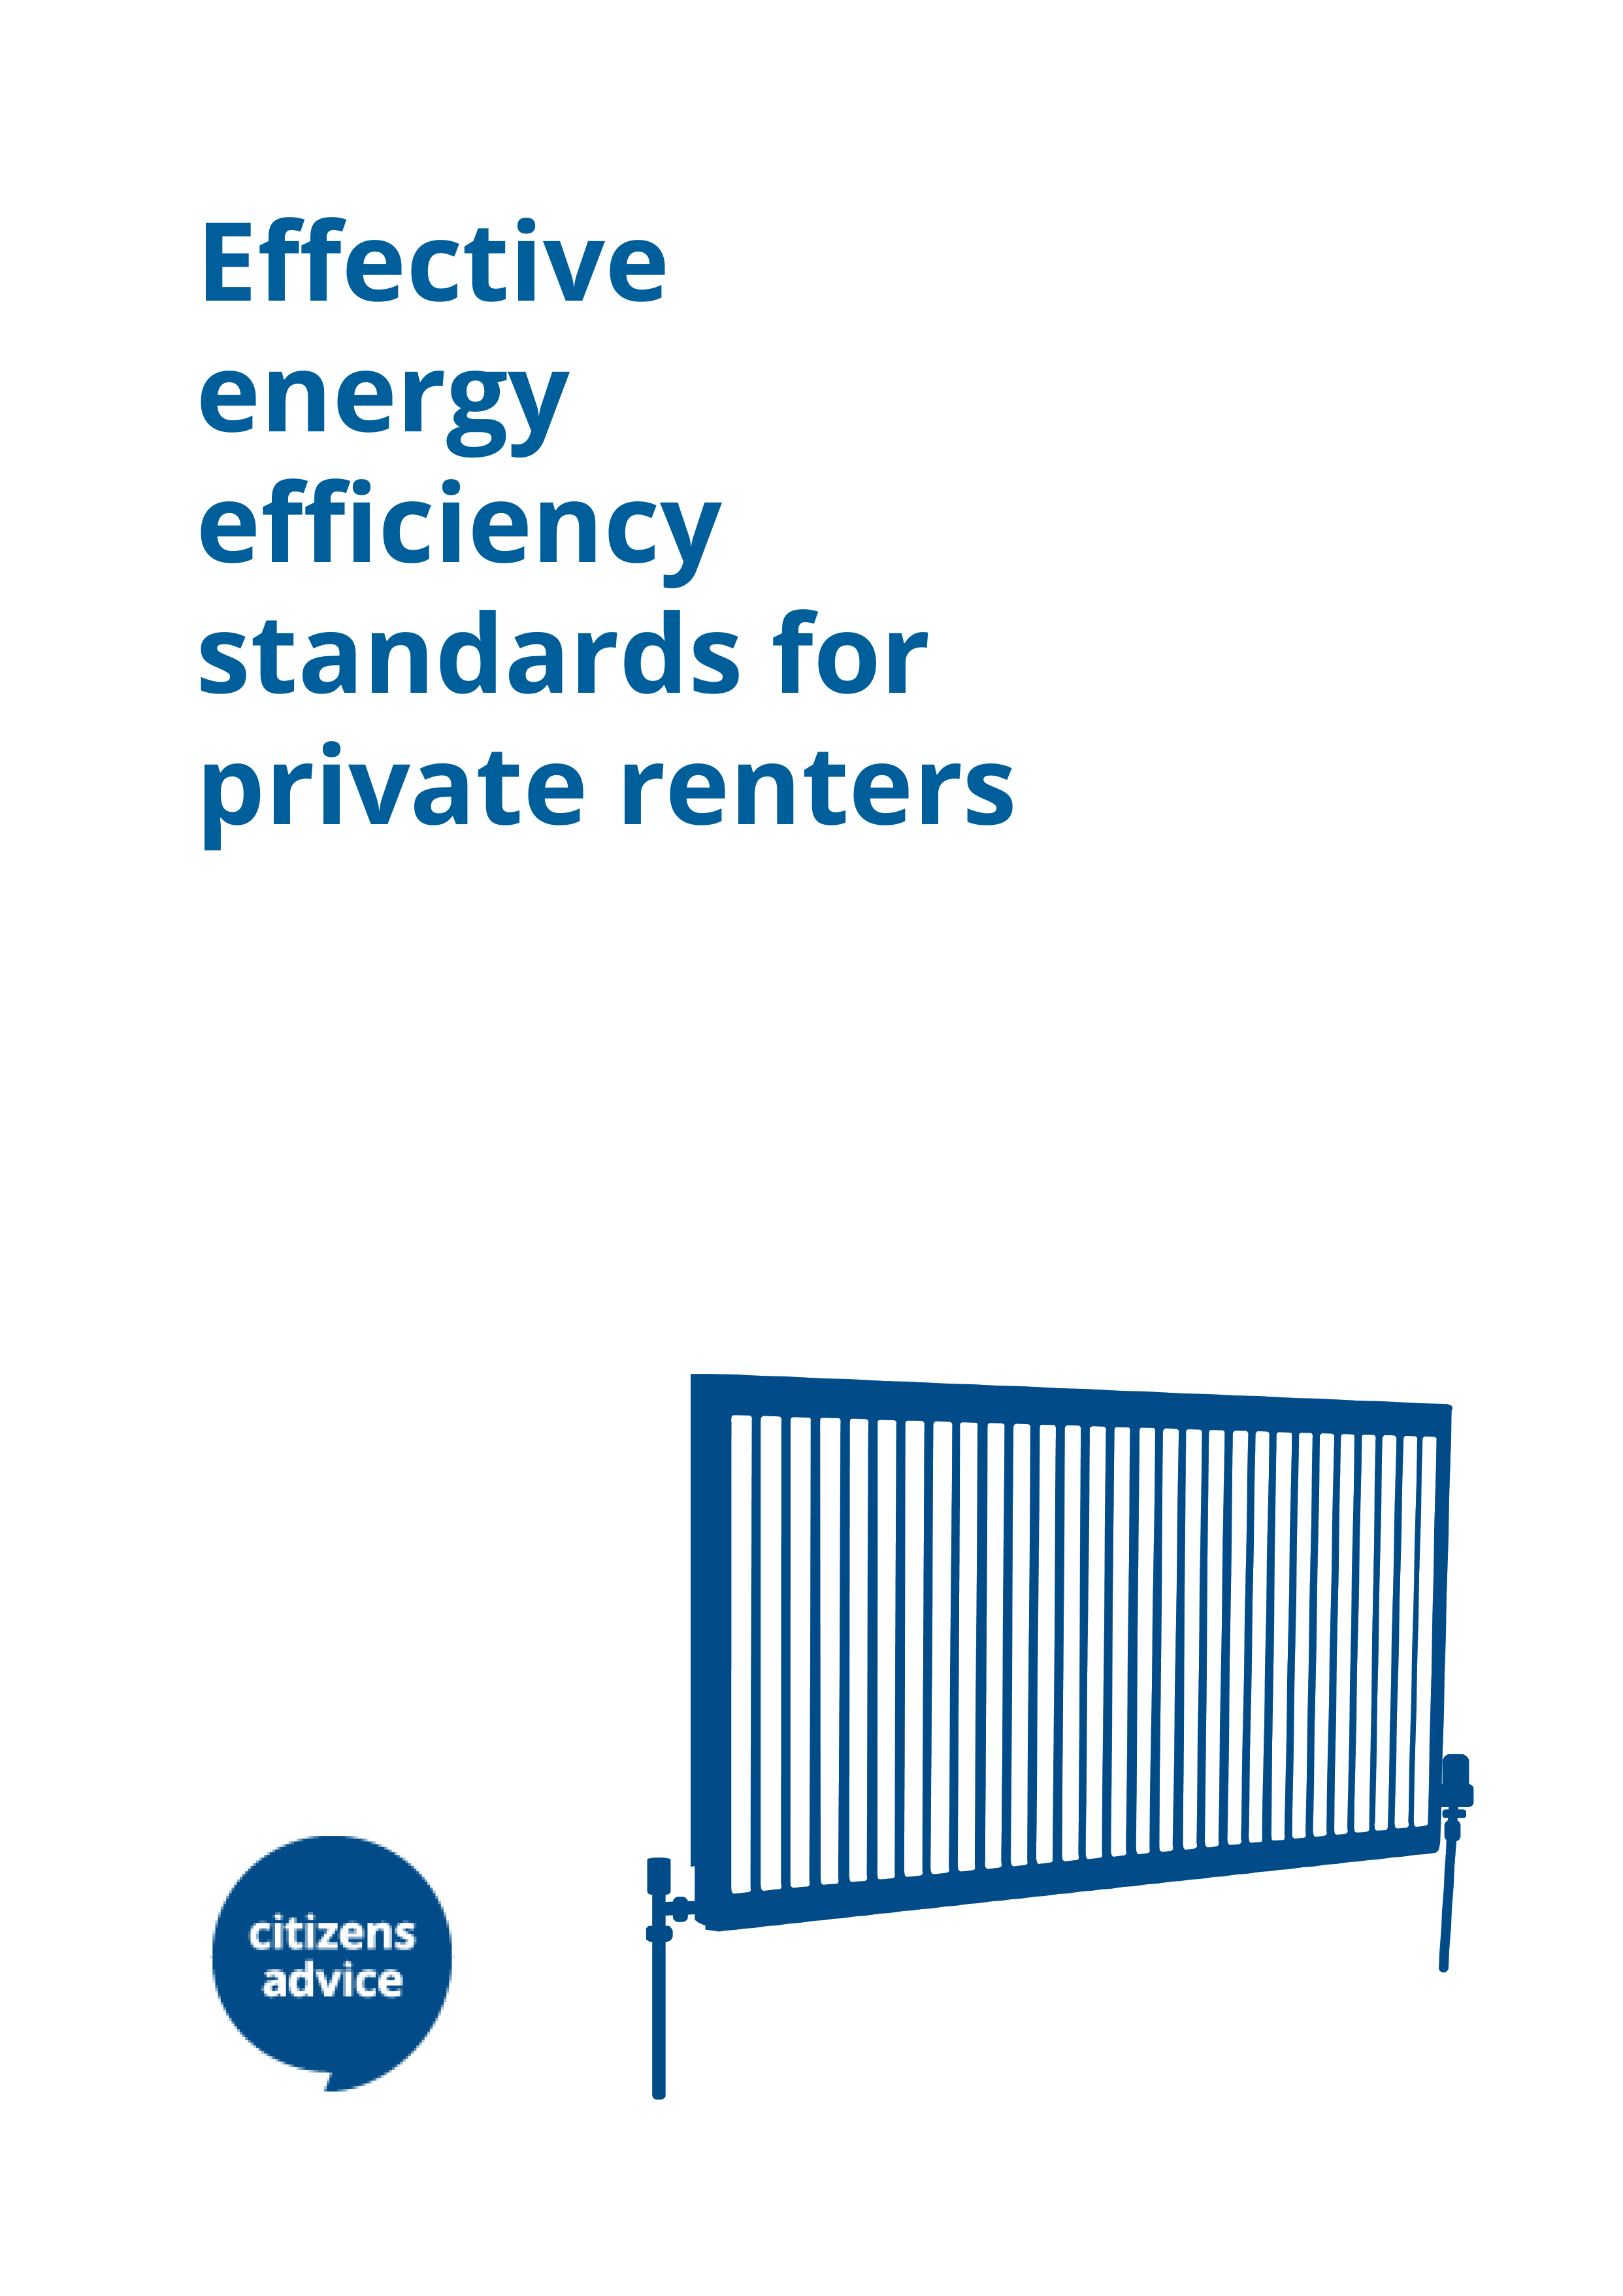 Effective energy efficiency standards for private renters